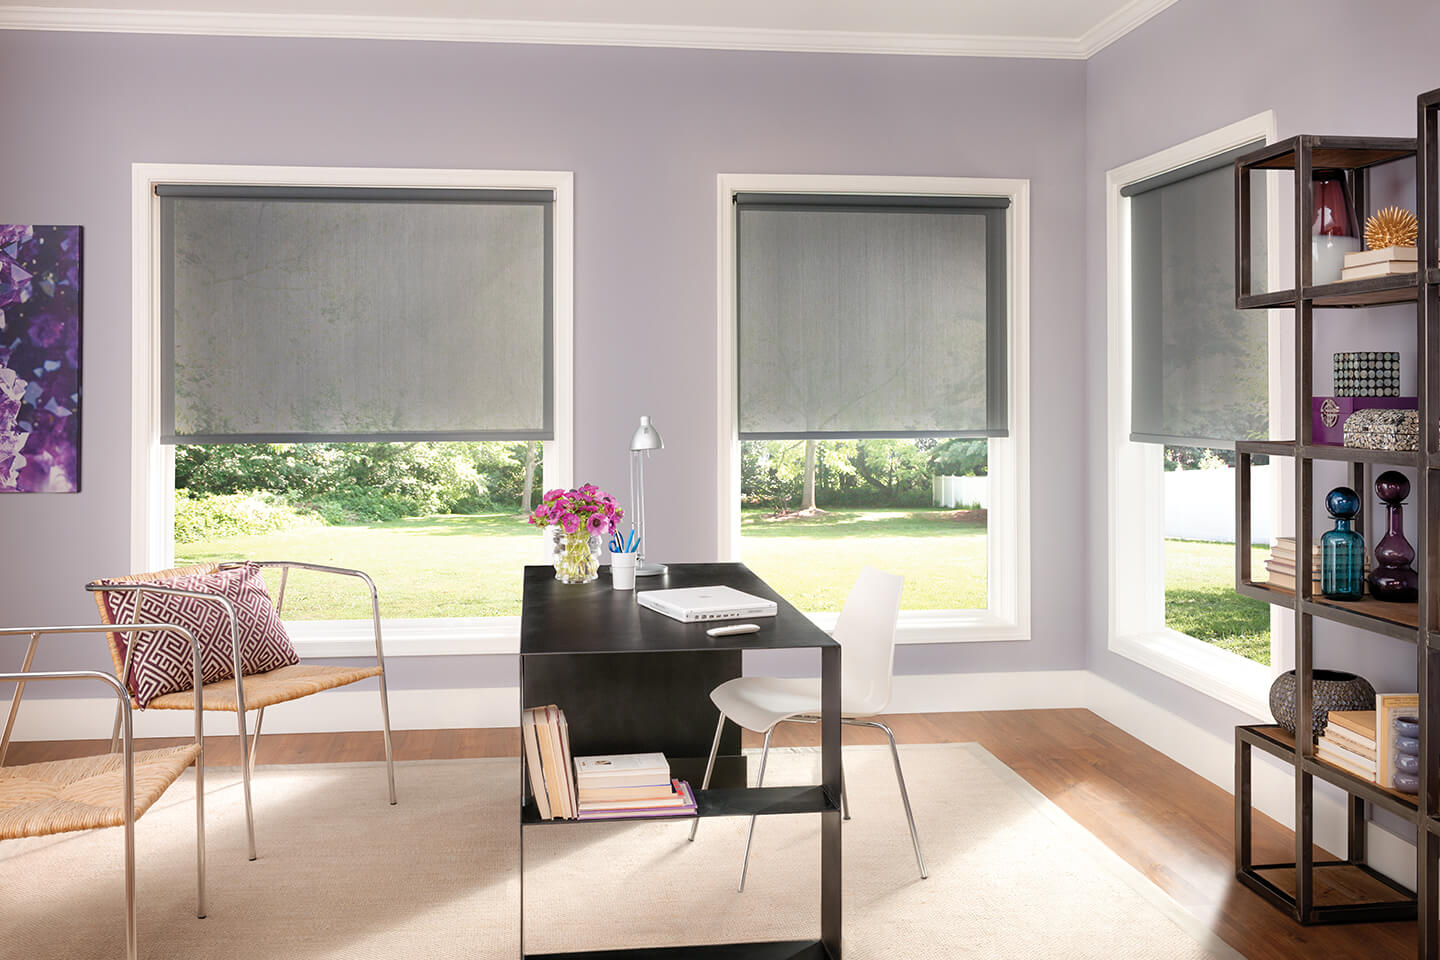 shades solar bali blinds support scenes costco guides troubleshooting